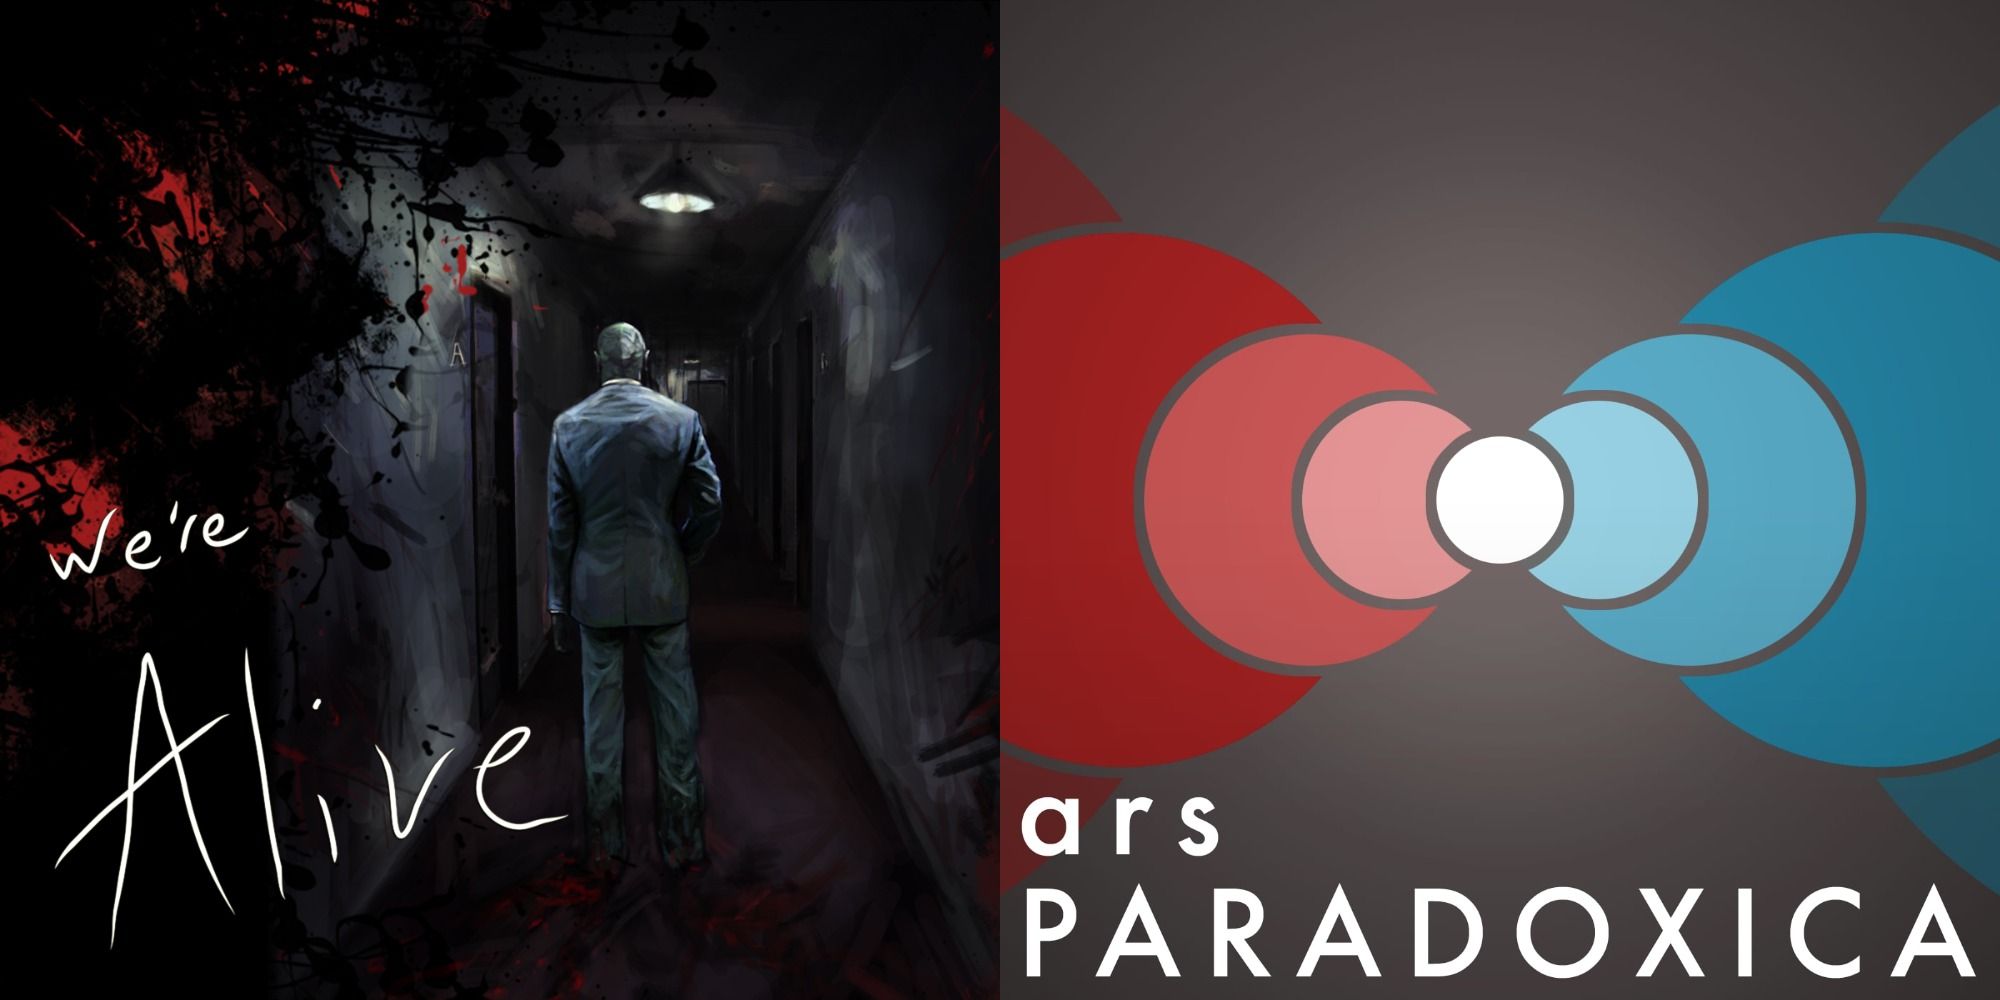 Split Image: 'We're Alive' poster with a dark hallway and a man facing away; abstract art for 'ars PARADOXICA' logo